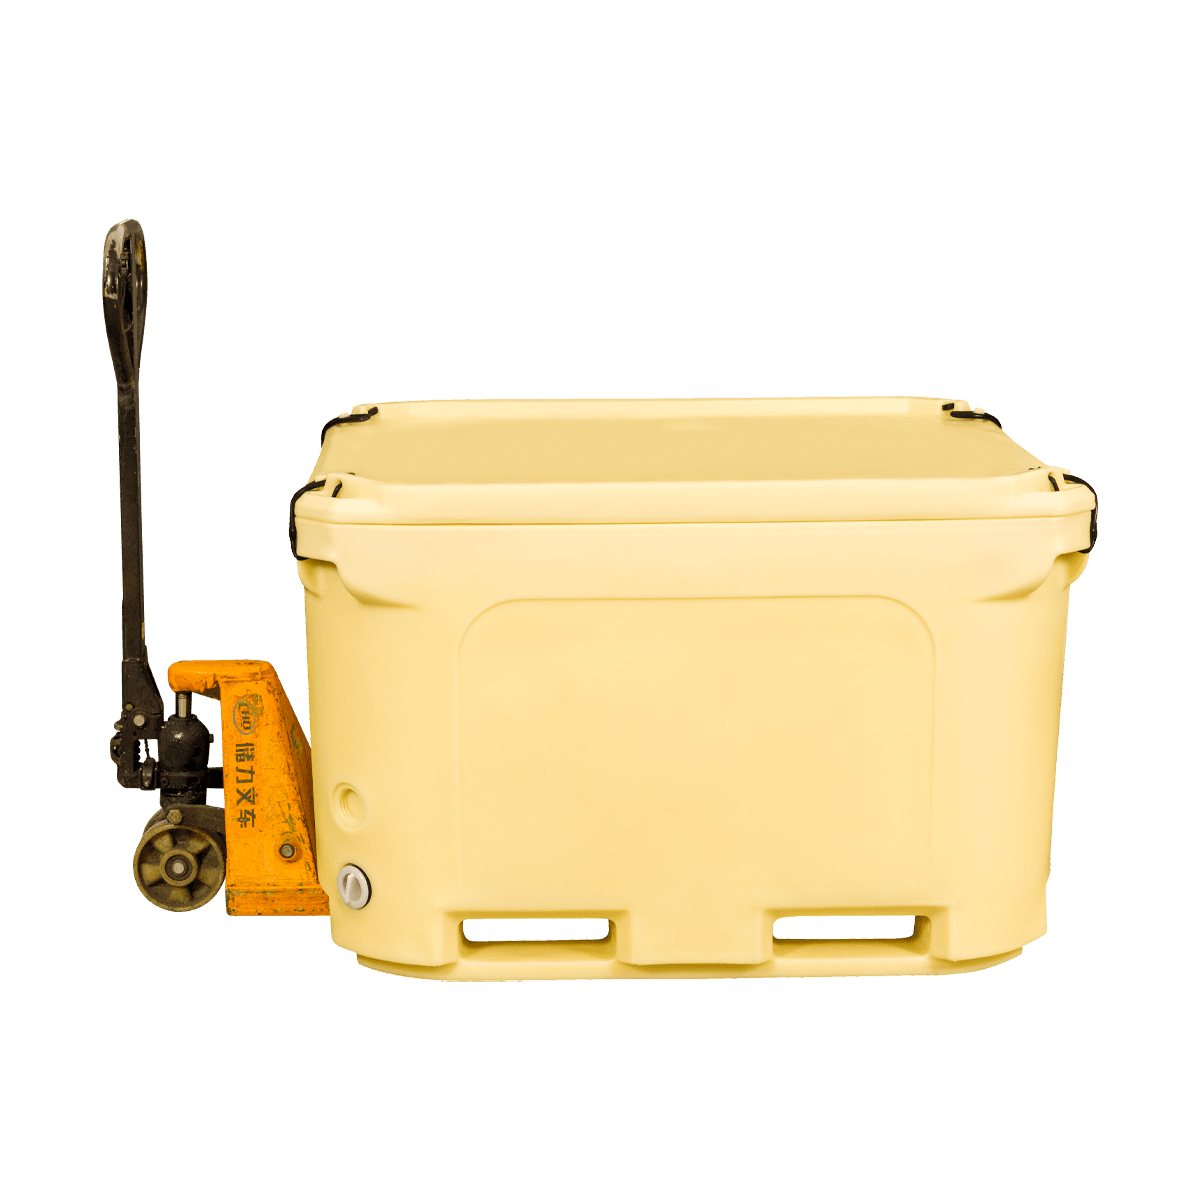 New Thermal Insulated Seafood Containers Is Safe And Reliable